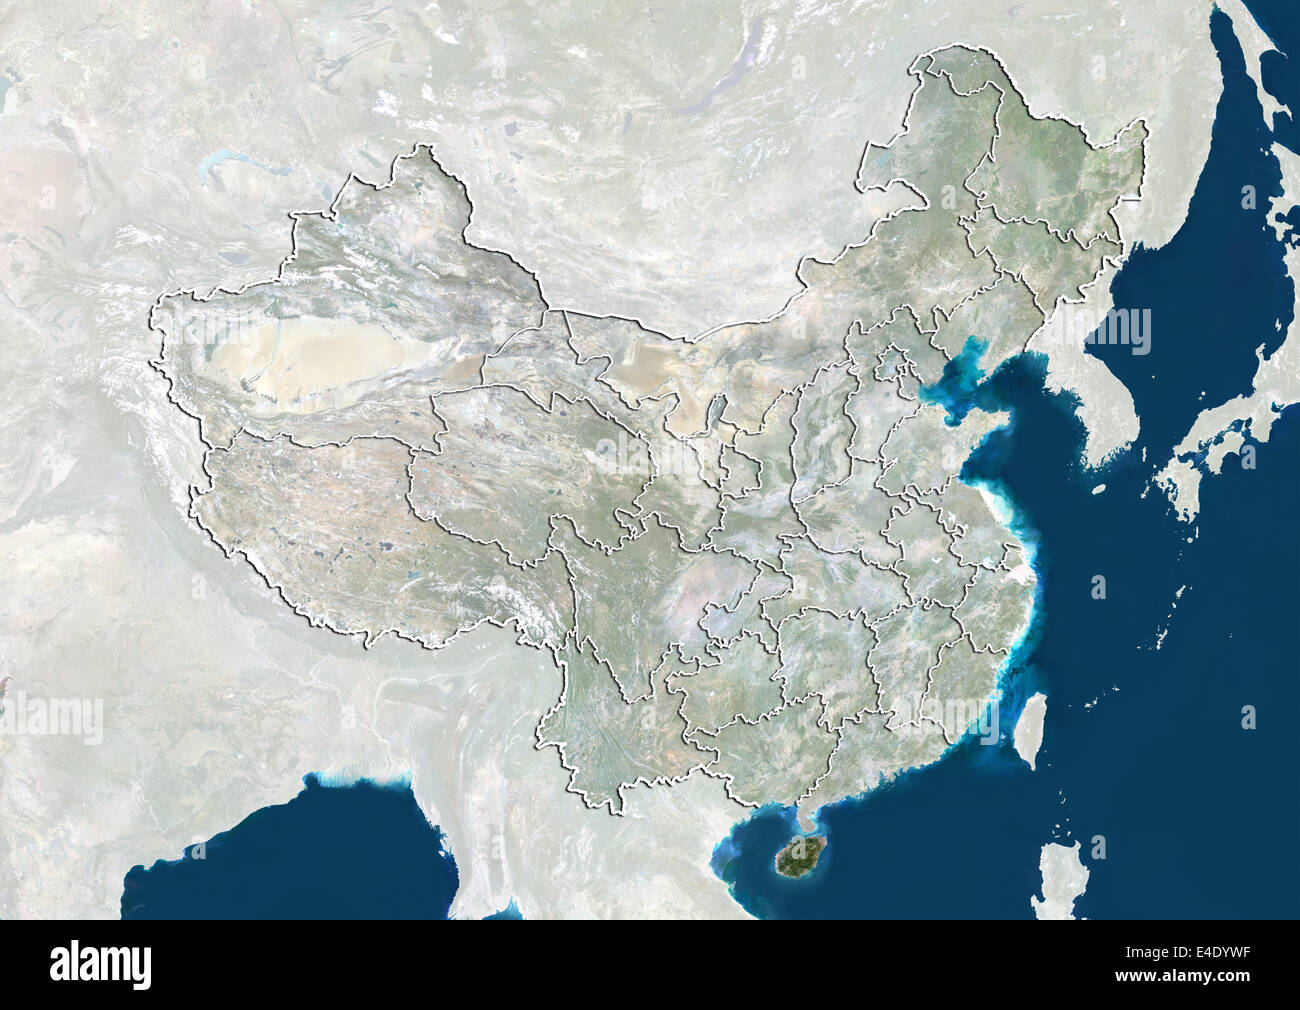 China and the Province of Hainan, True Colour Satellite Image Stock Photo